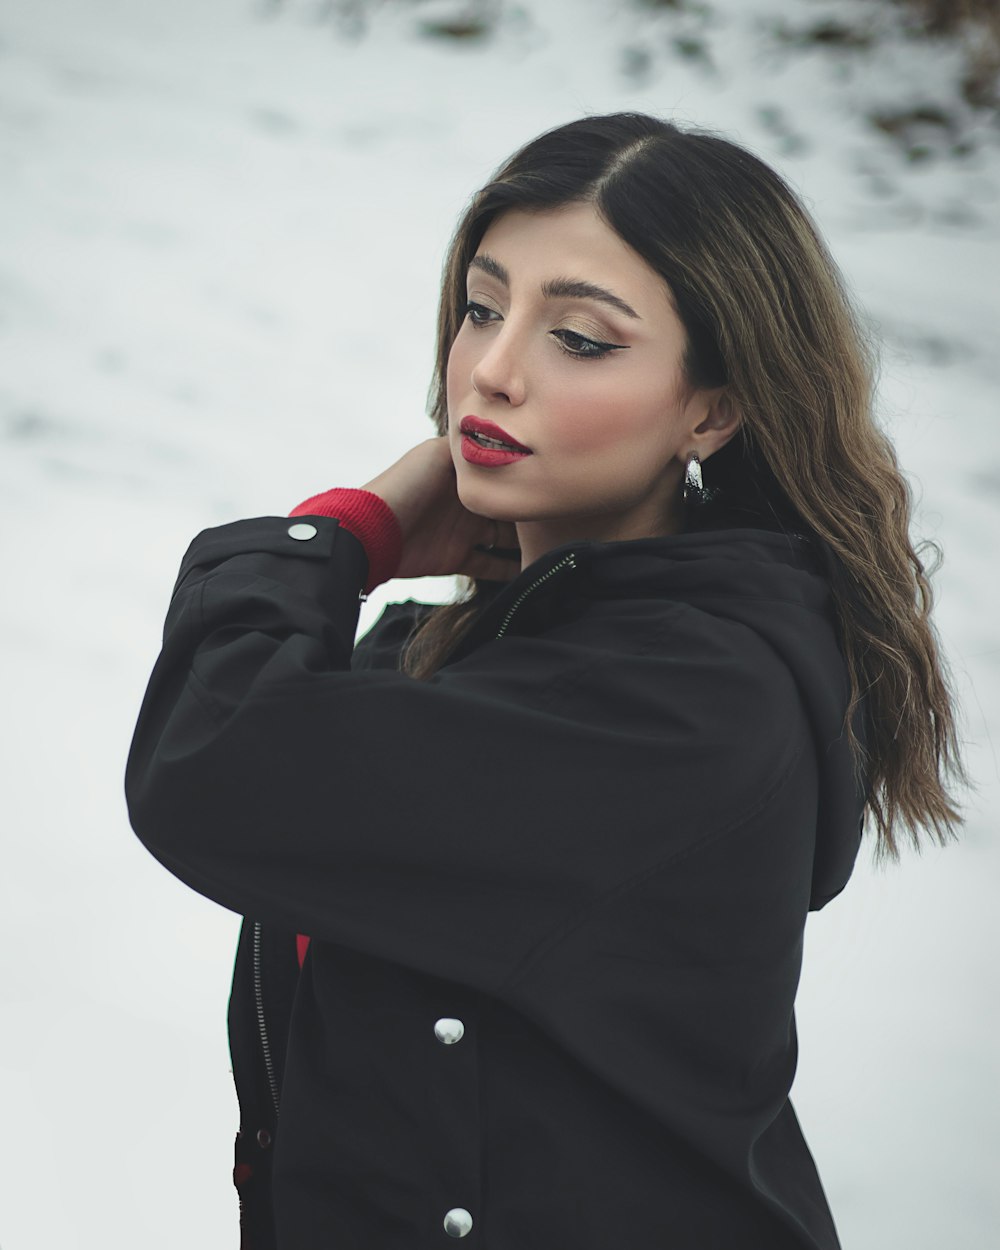 a woman standing in the snow wearing a black jacket